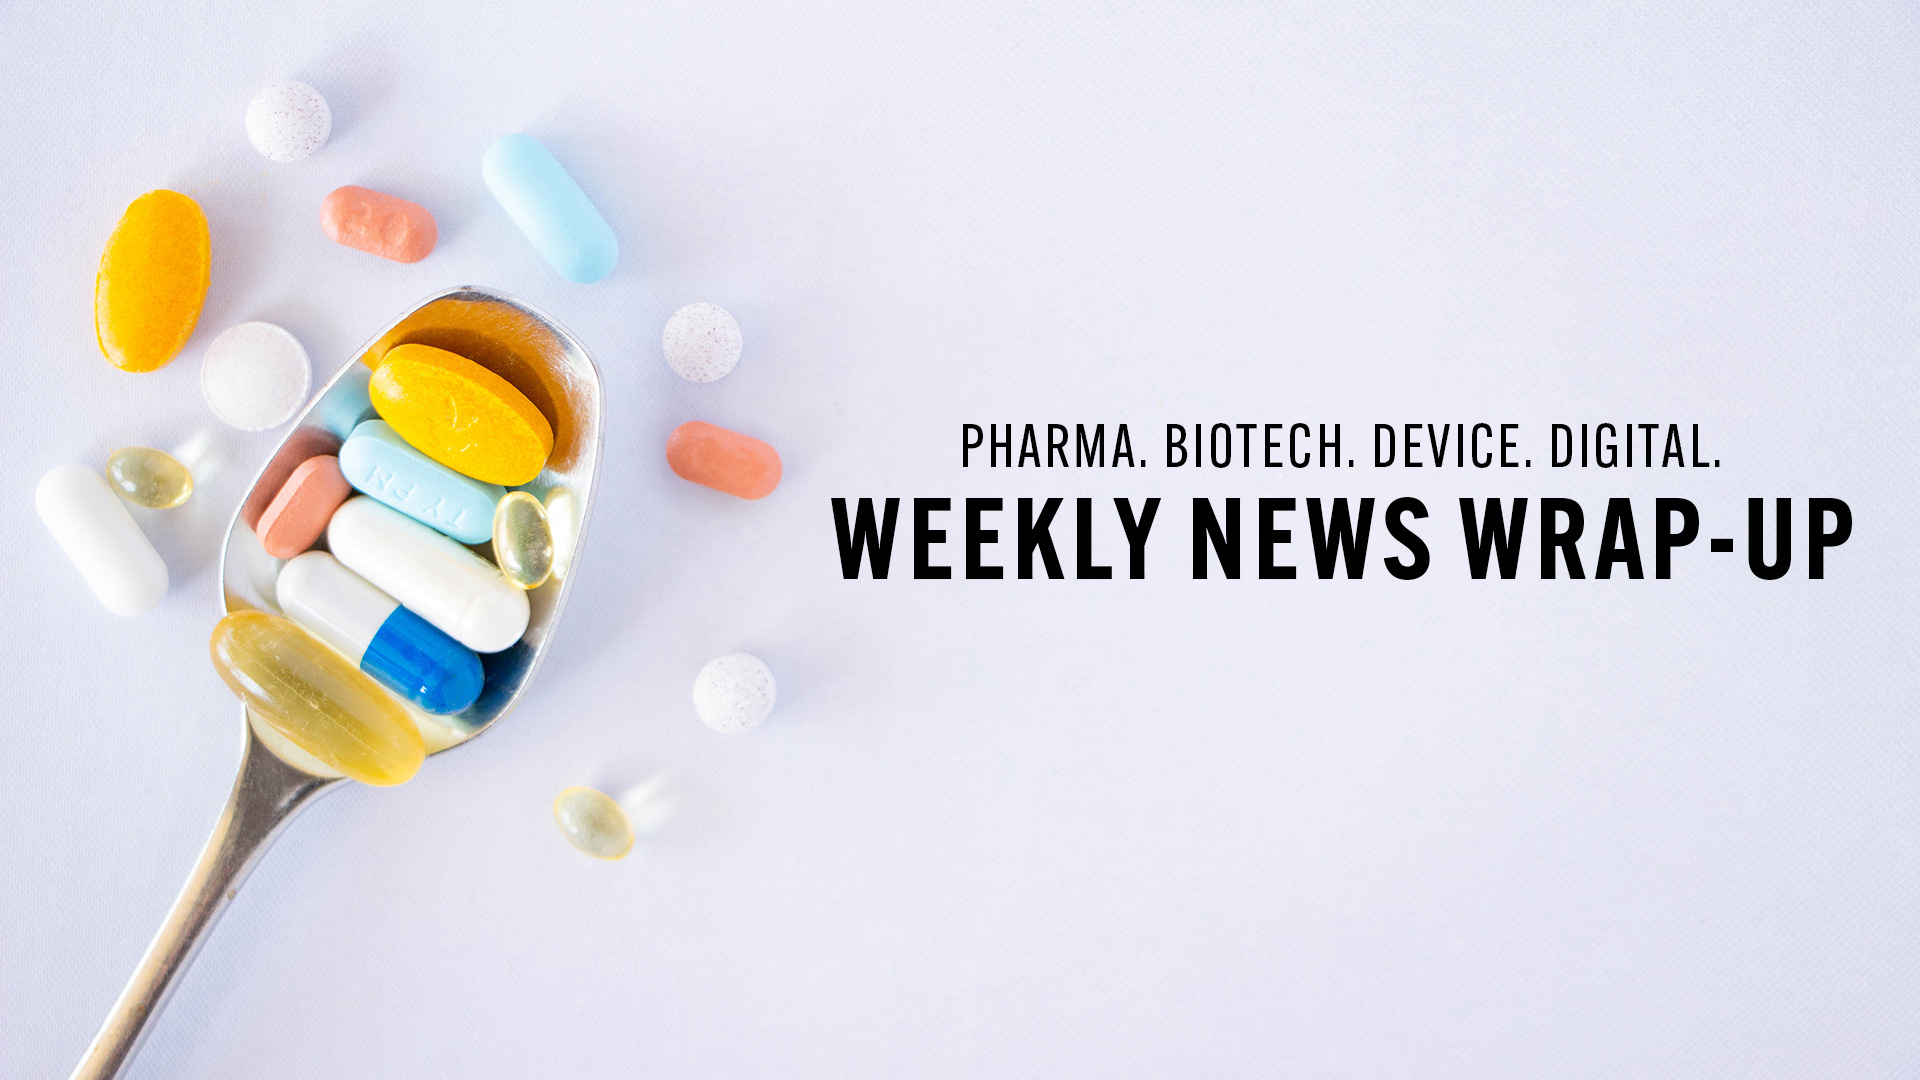 Healthcare Industry News Weekly Wrap-Up: February 10, 2023